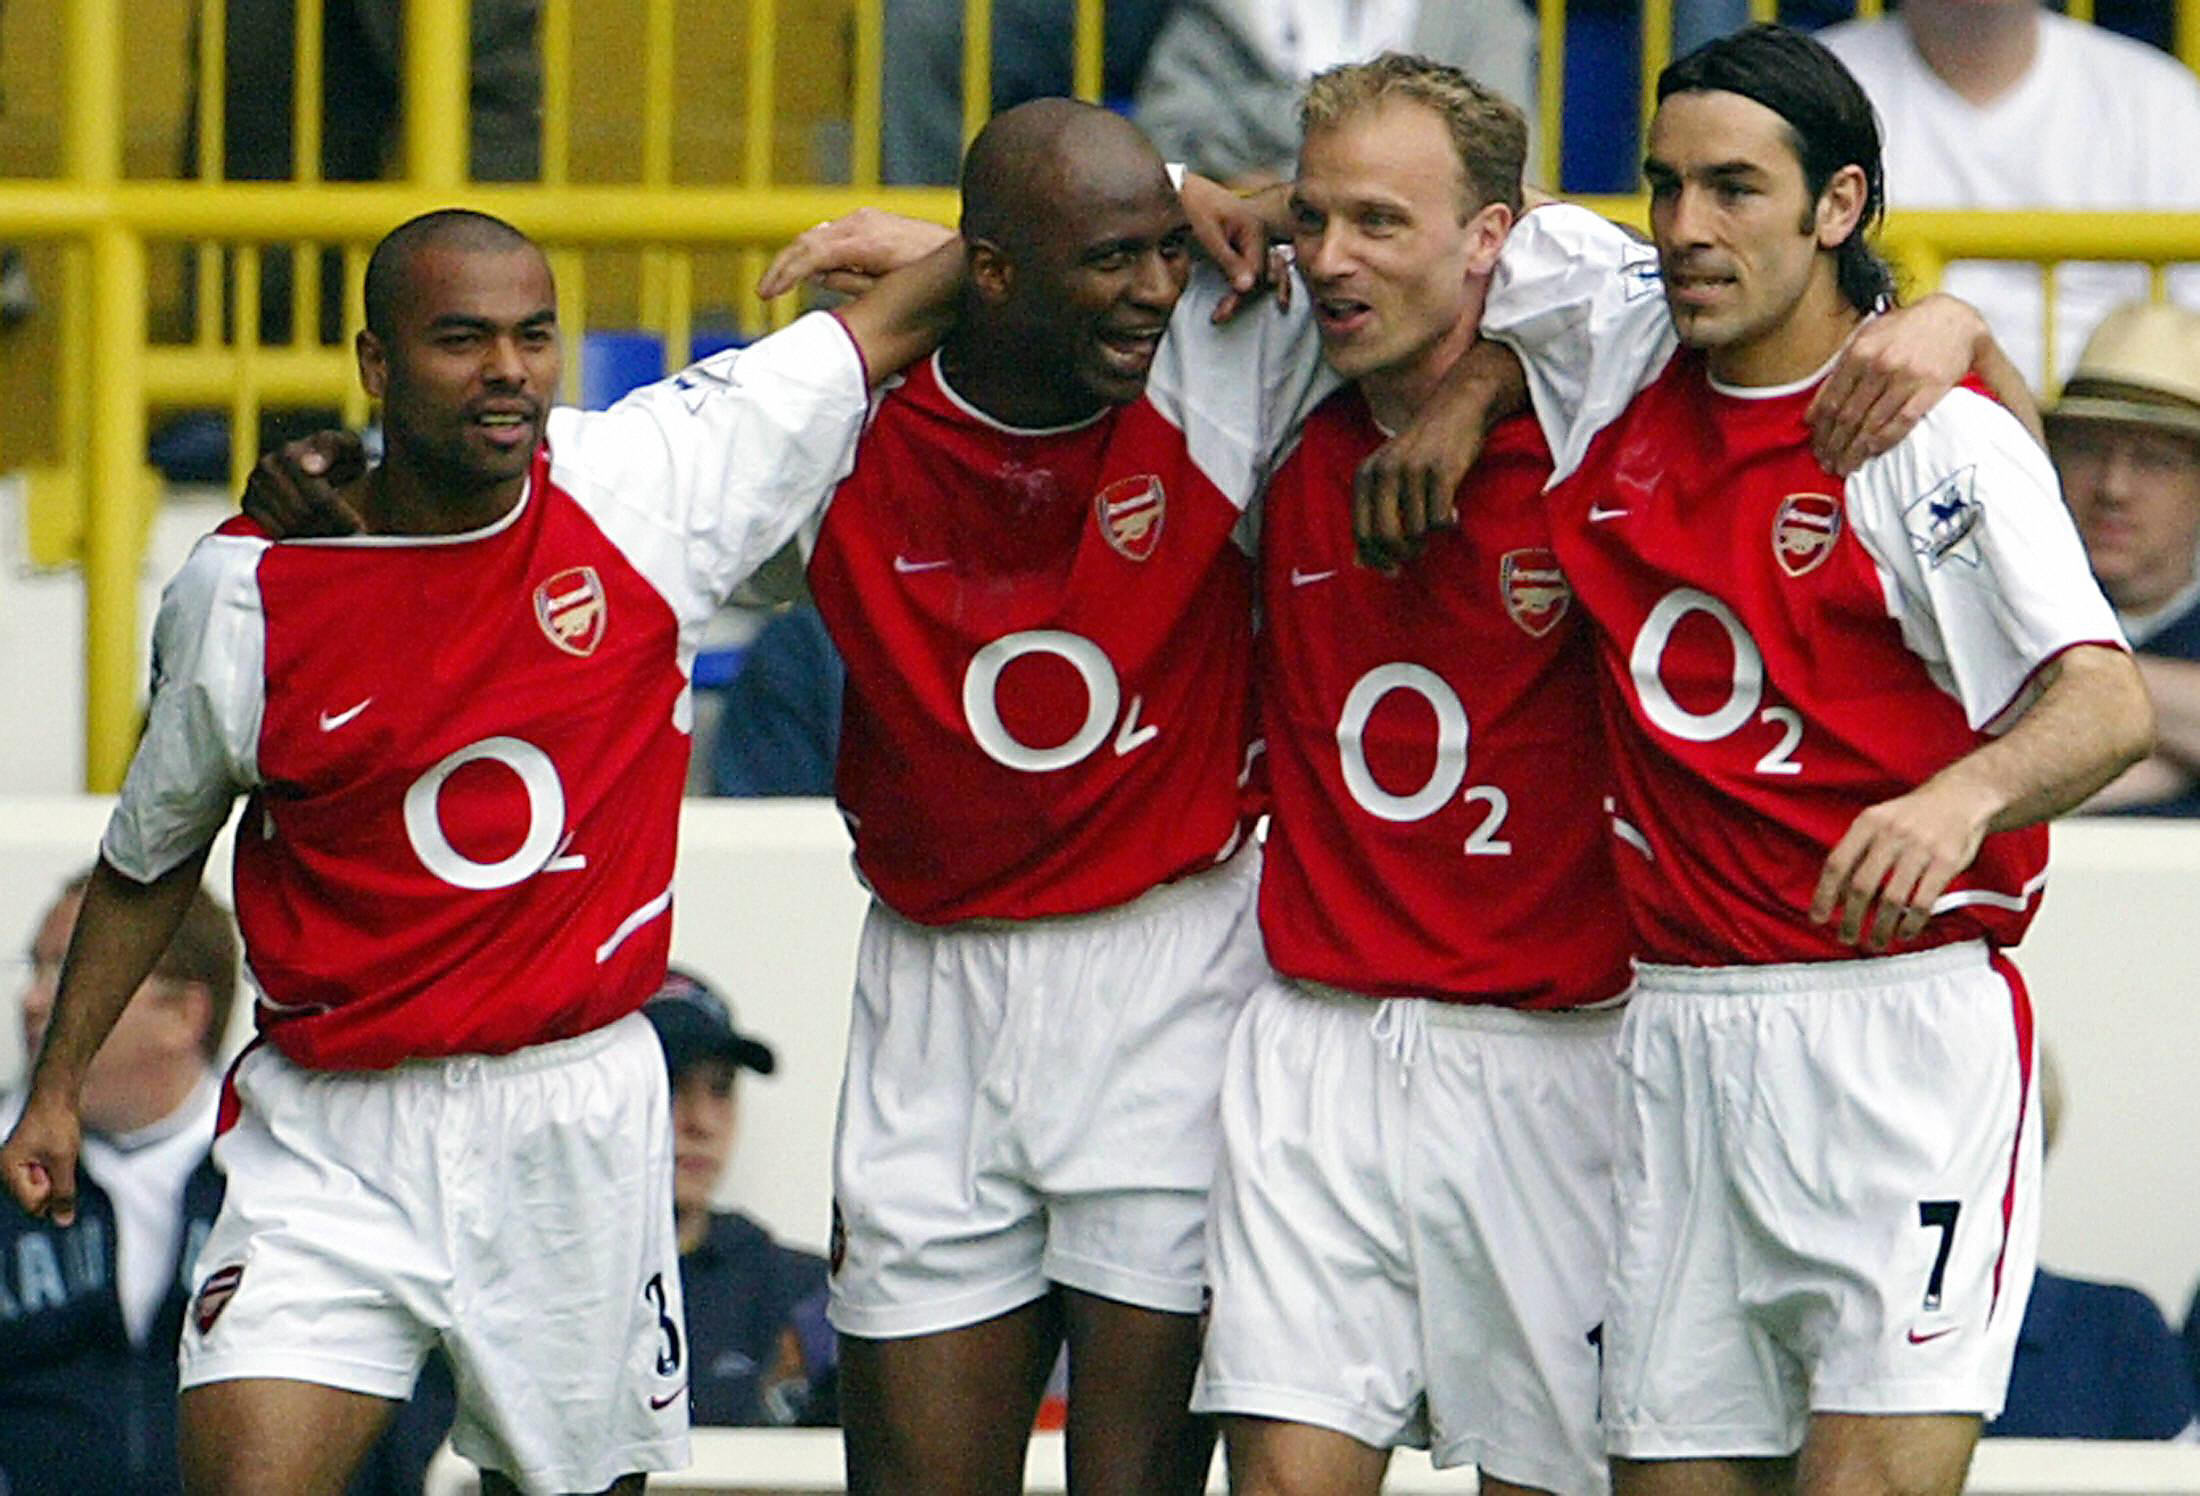 LONDON, UNITED KINGDOM:  Arsenal's French captain Patrick Vieira (2ndL) celebrates his goal against Tottenham with teammates Ashley Cole (L), Dennis Bergkamp (2ndR) and Robert Pires (R) during their Premier League football match at White Hart Lane in north London, 25 April 2004.  AFP PHOTO / ODD ANDERSEN     - - No telcos,website use to description of license with FAPL on, www.faplweb.com - -  (Photo credit should read ODD ANDERSEN/AFP/Getty Images)